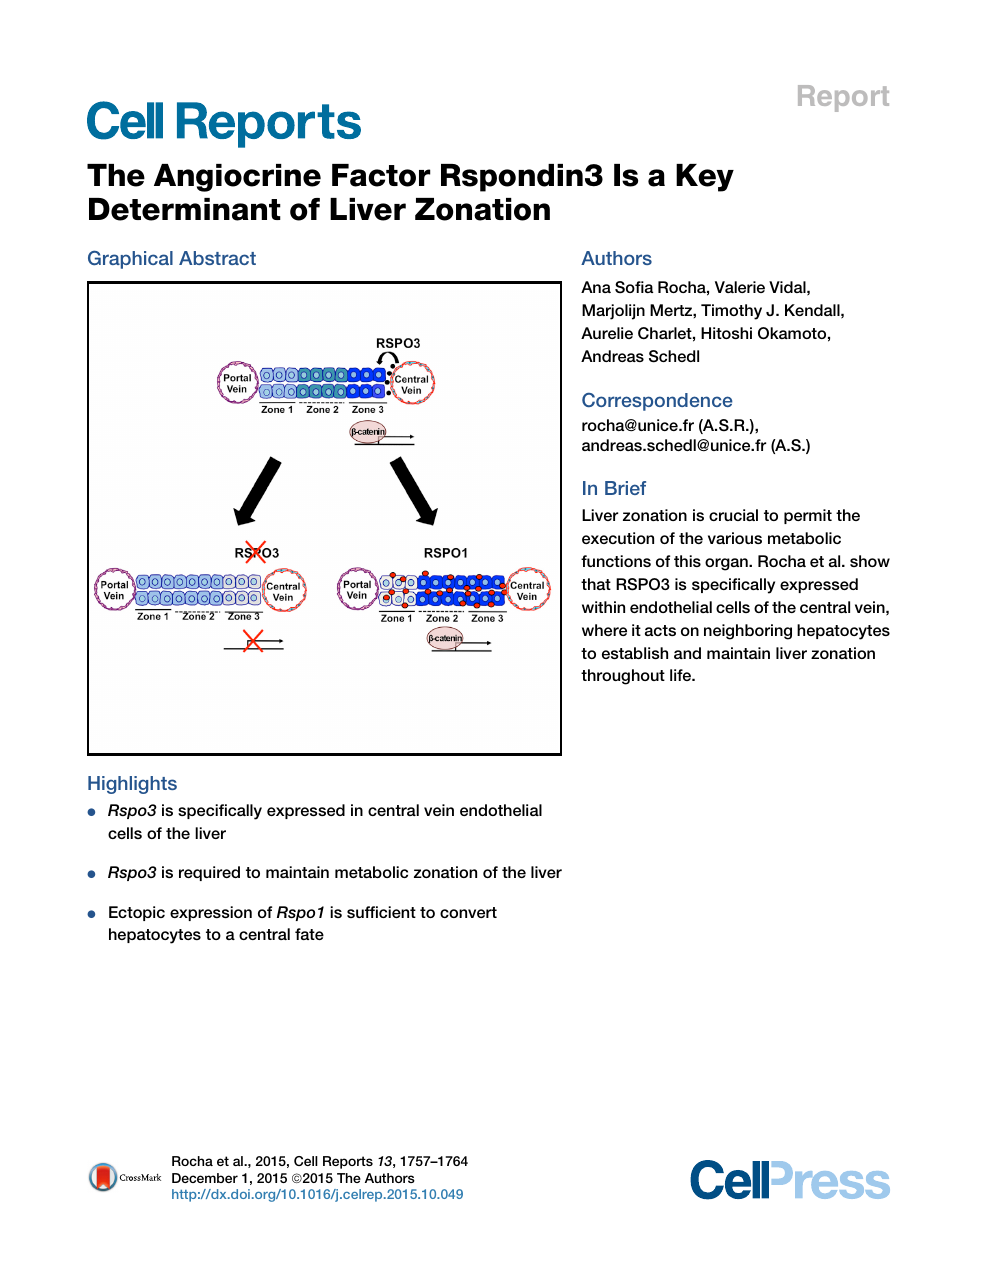 The Angiocrine Factor Rspondin3 Is A Key Determinant Of Liver Zonation Topic Of Research Paper In Biological Sciences Download Scholarly Article Pdf And Read For Free On Cyberleninka Open Science Hub